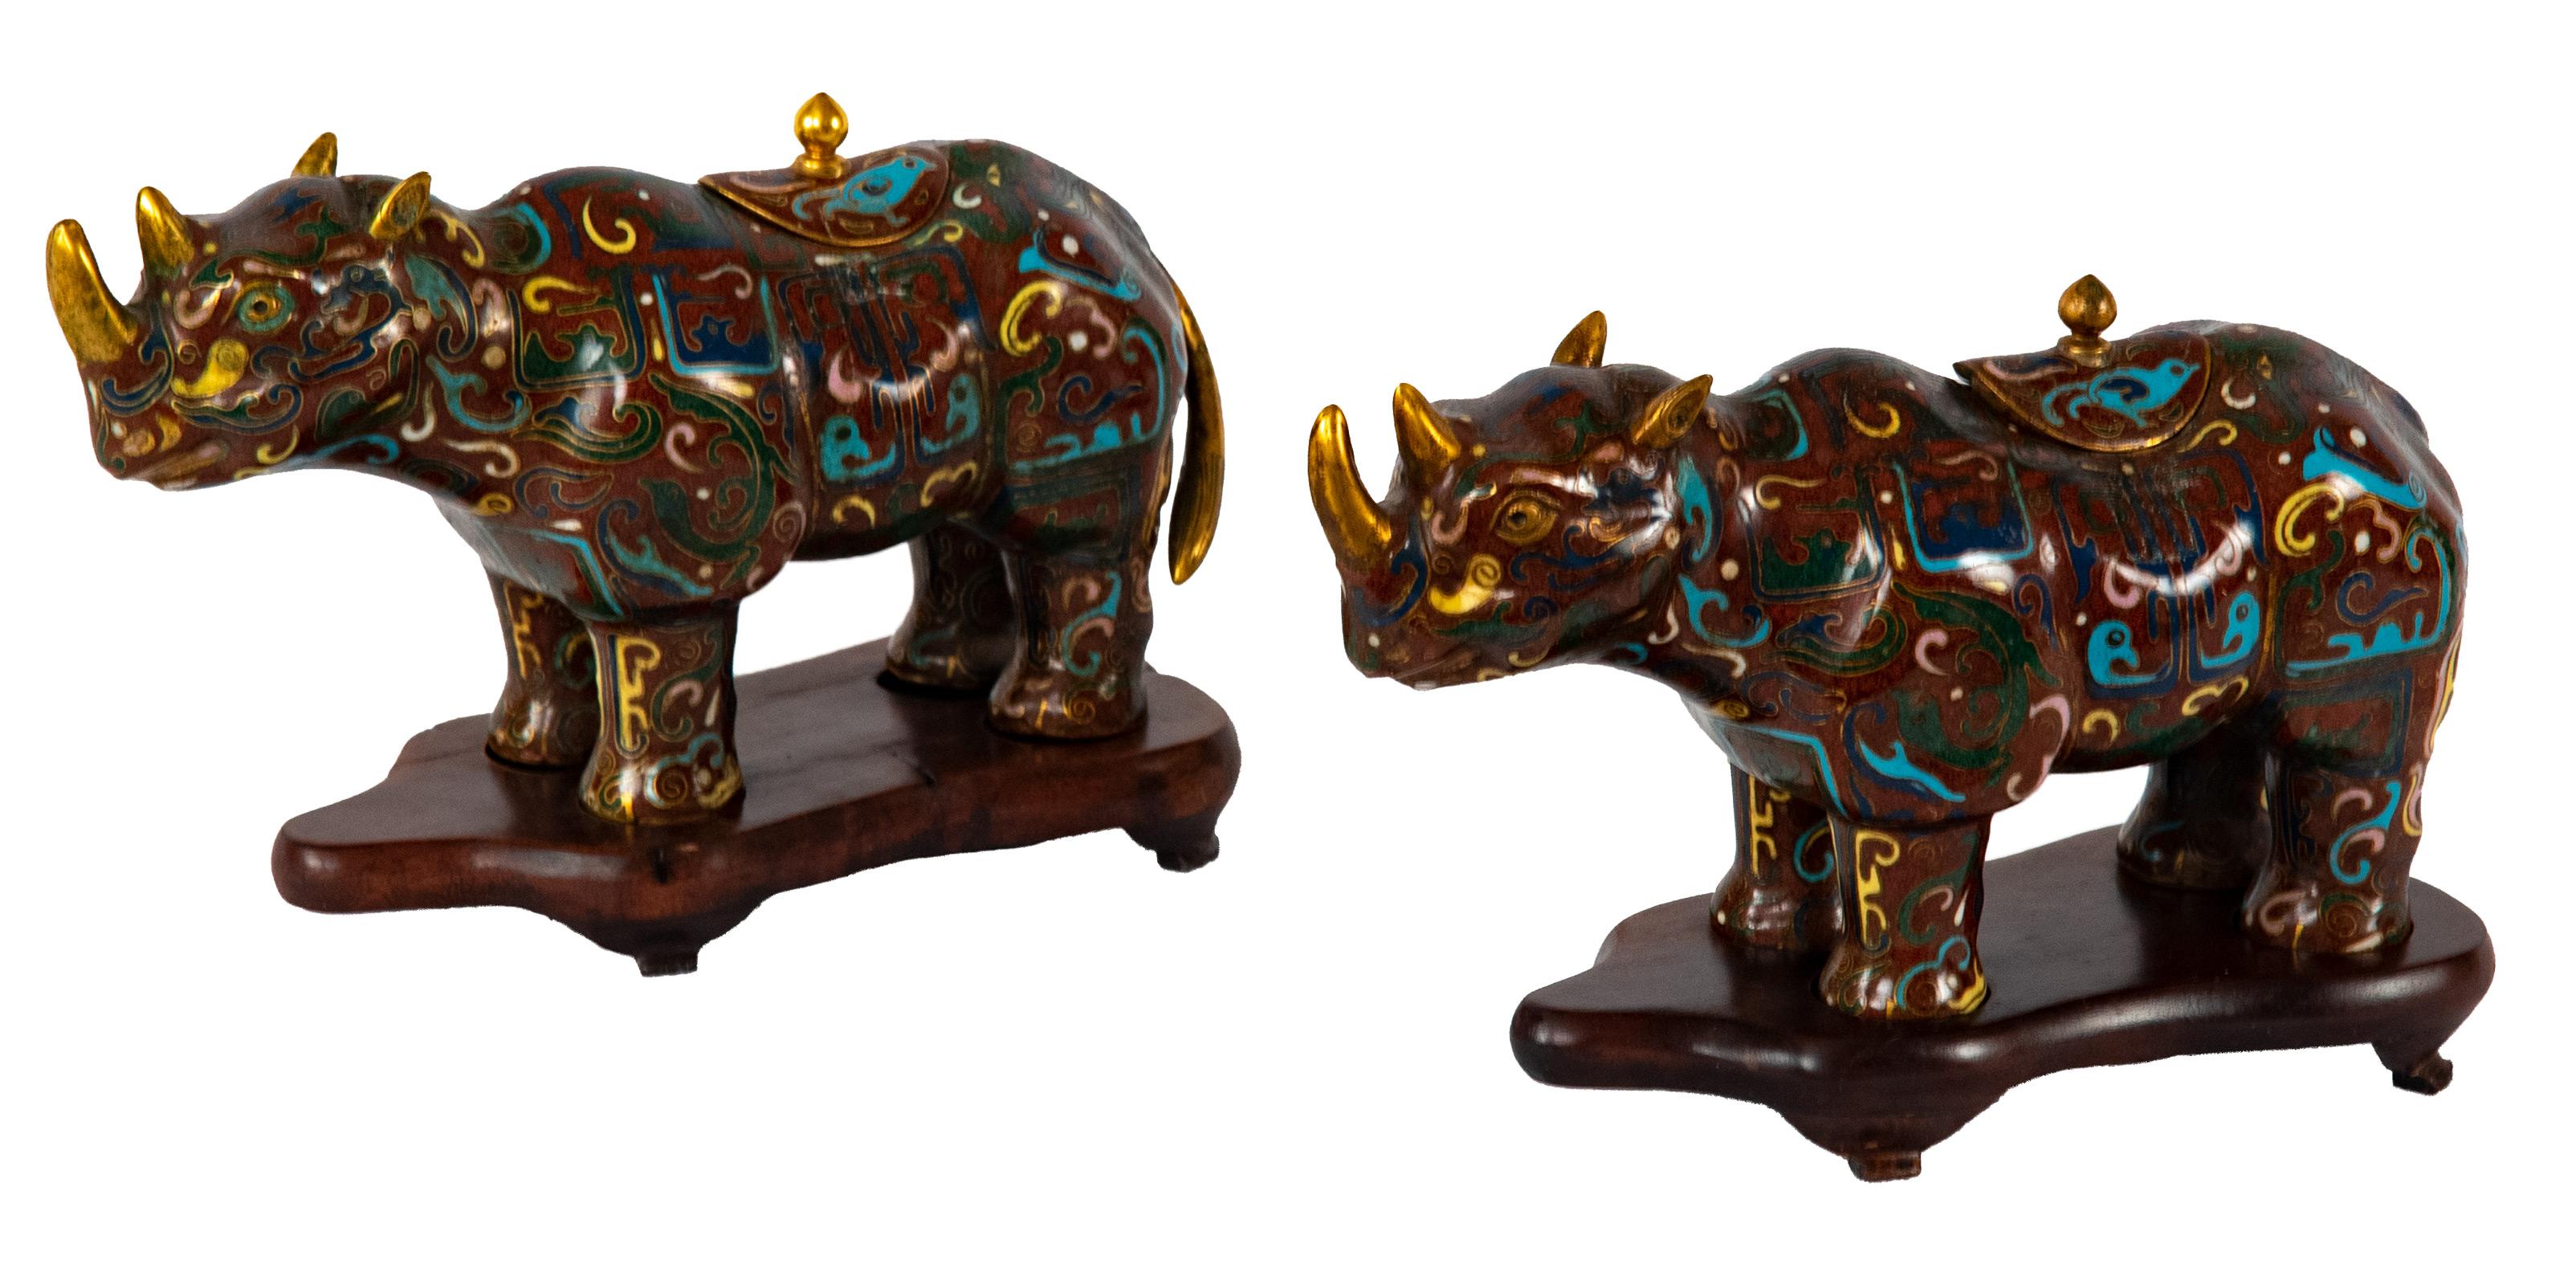 This pair of water pots in the form of standing rhinoceroses would have been made for the scholar's desk. Both are decorated with colorful patterns on an earth-red background; the brass of the horns, ears, and lid knobs are polished.